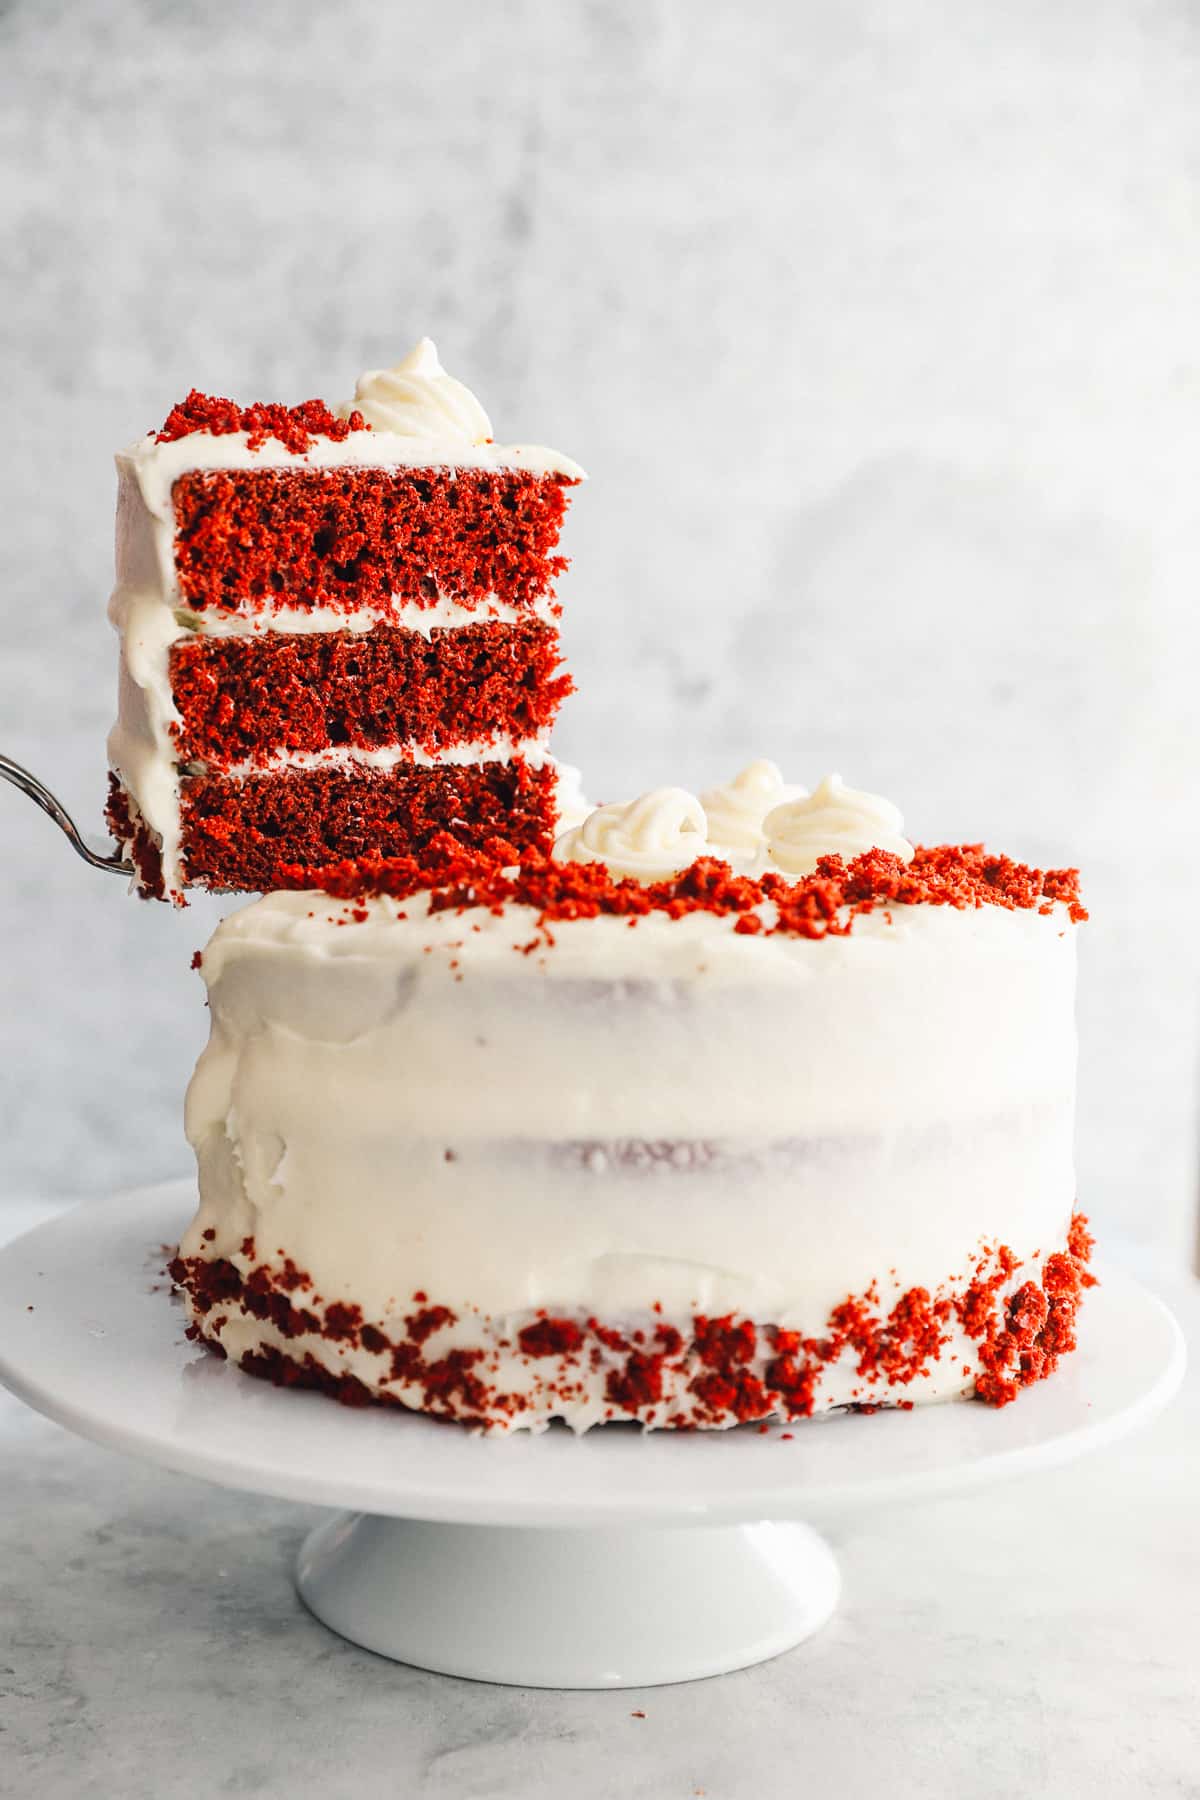 a cake server lifting a slice of red velvet cake from a cake on a white cake stand.